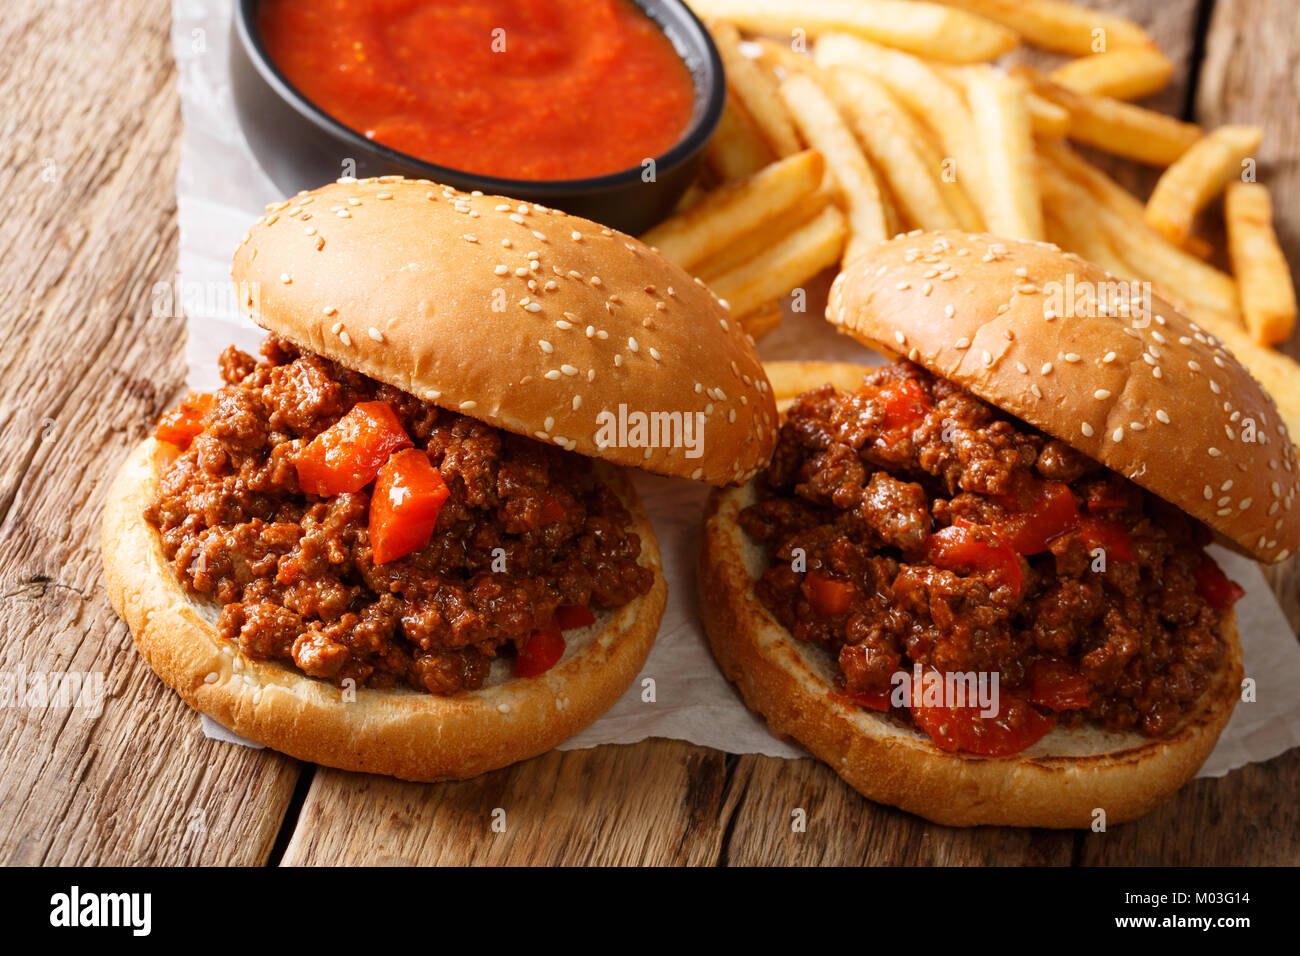 American nourishing sandwiches Sloppy Joe and french fries, ketchup closeup on the table. horizontal Stock Photo